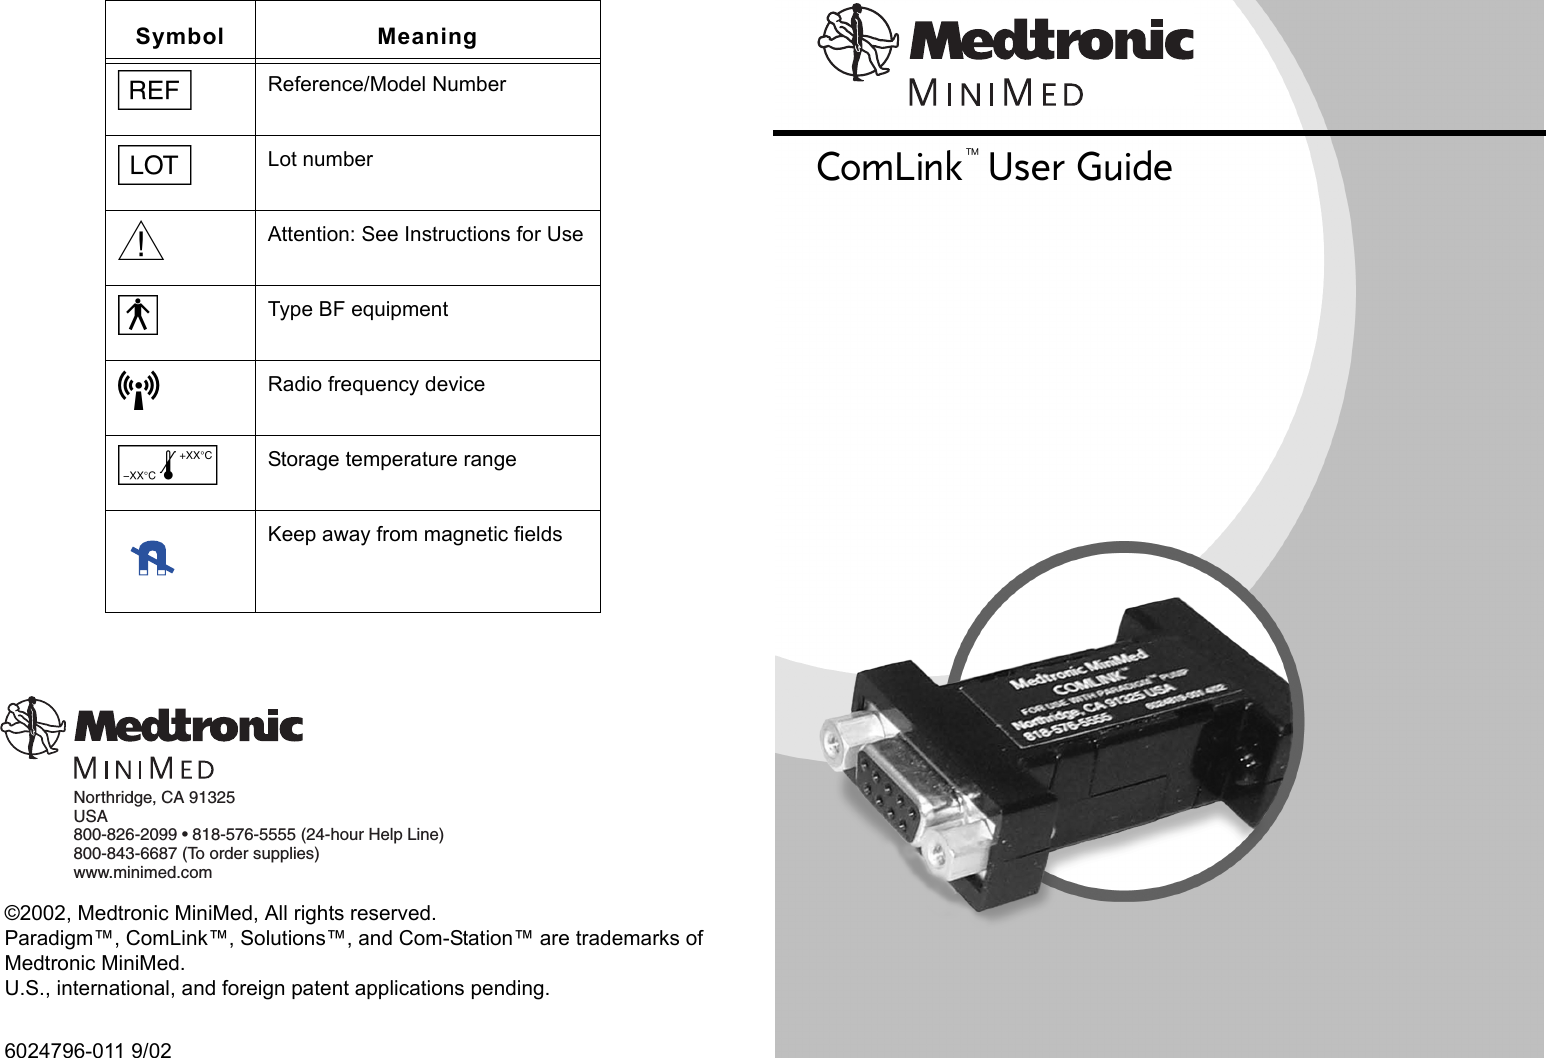 ©2002, Medtronic MiniMed, All rights reserved. Paradigm™, ComLink™, Solutions™, and Com-Station™ are trademarks of Medtronic MiniMed.U.S., international, and foreign patent applications pending.6024796-011 9/02Symbol MeaningjReference/Model NumberlLot numberwAttention: See Instructions for UseyType BF equipmentLRadio frequency device&amp;Storage temperature rangeKeep away from magnetic fieldsNorthridge, CA 91325USA800-826-2099 • 818-576-5555 (24-hour Help Line)800-843-6687 (To order supplies)www.minimed.comComLink™ User Guide